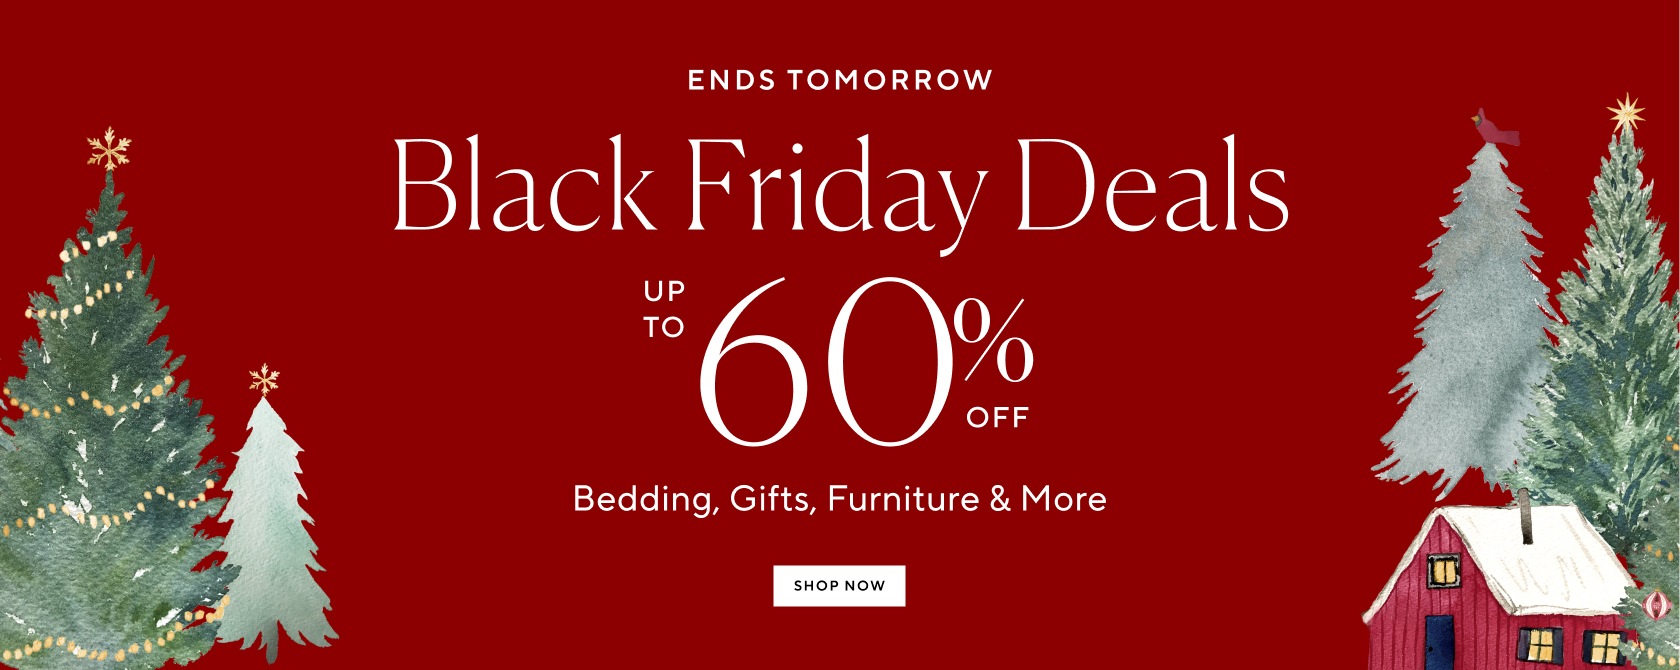 Black Friday: Up to 60% Off